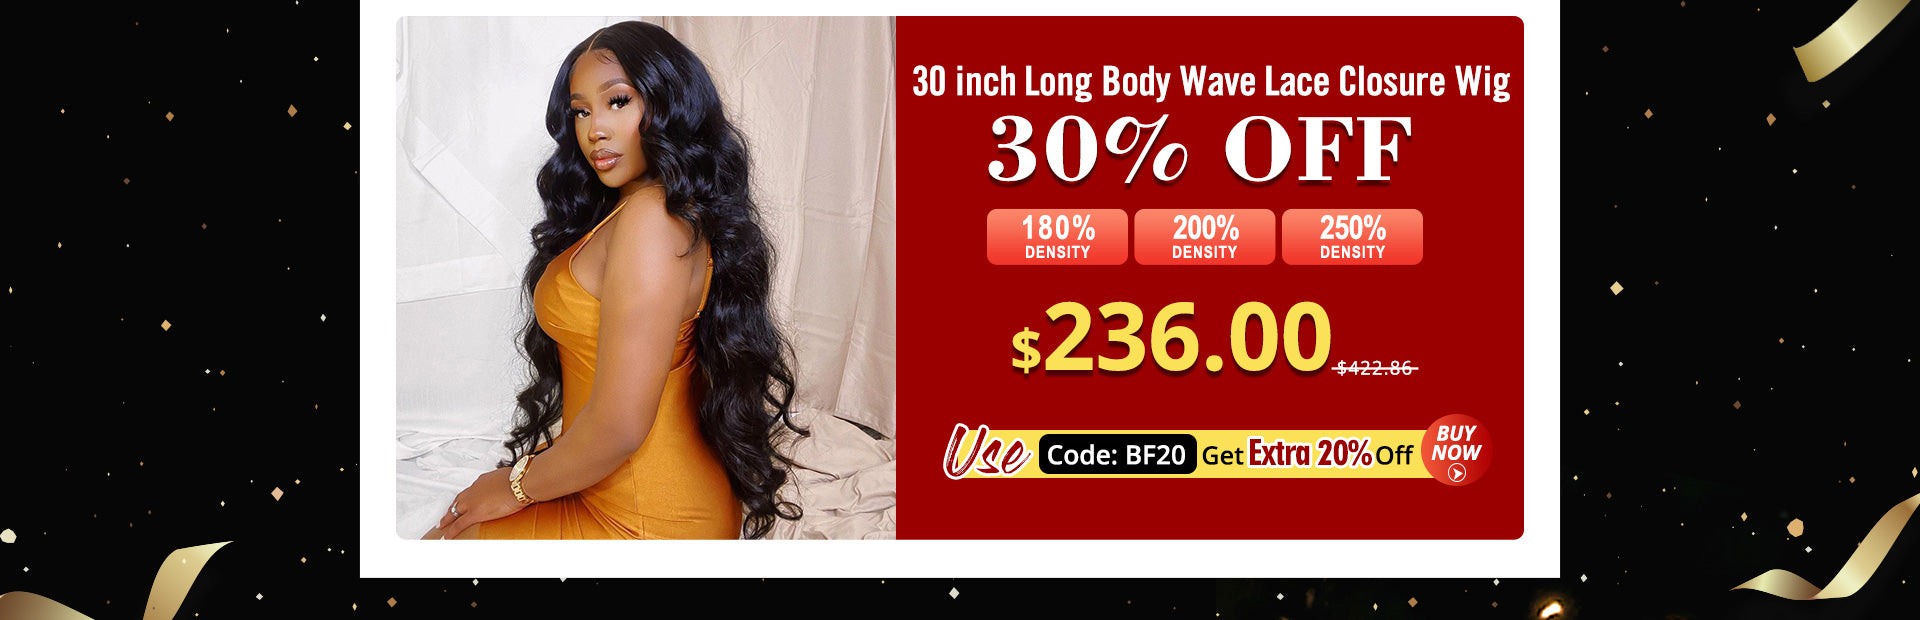 30 Inch Long Body Wave Lace Closure Wig